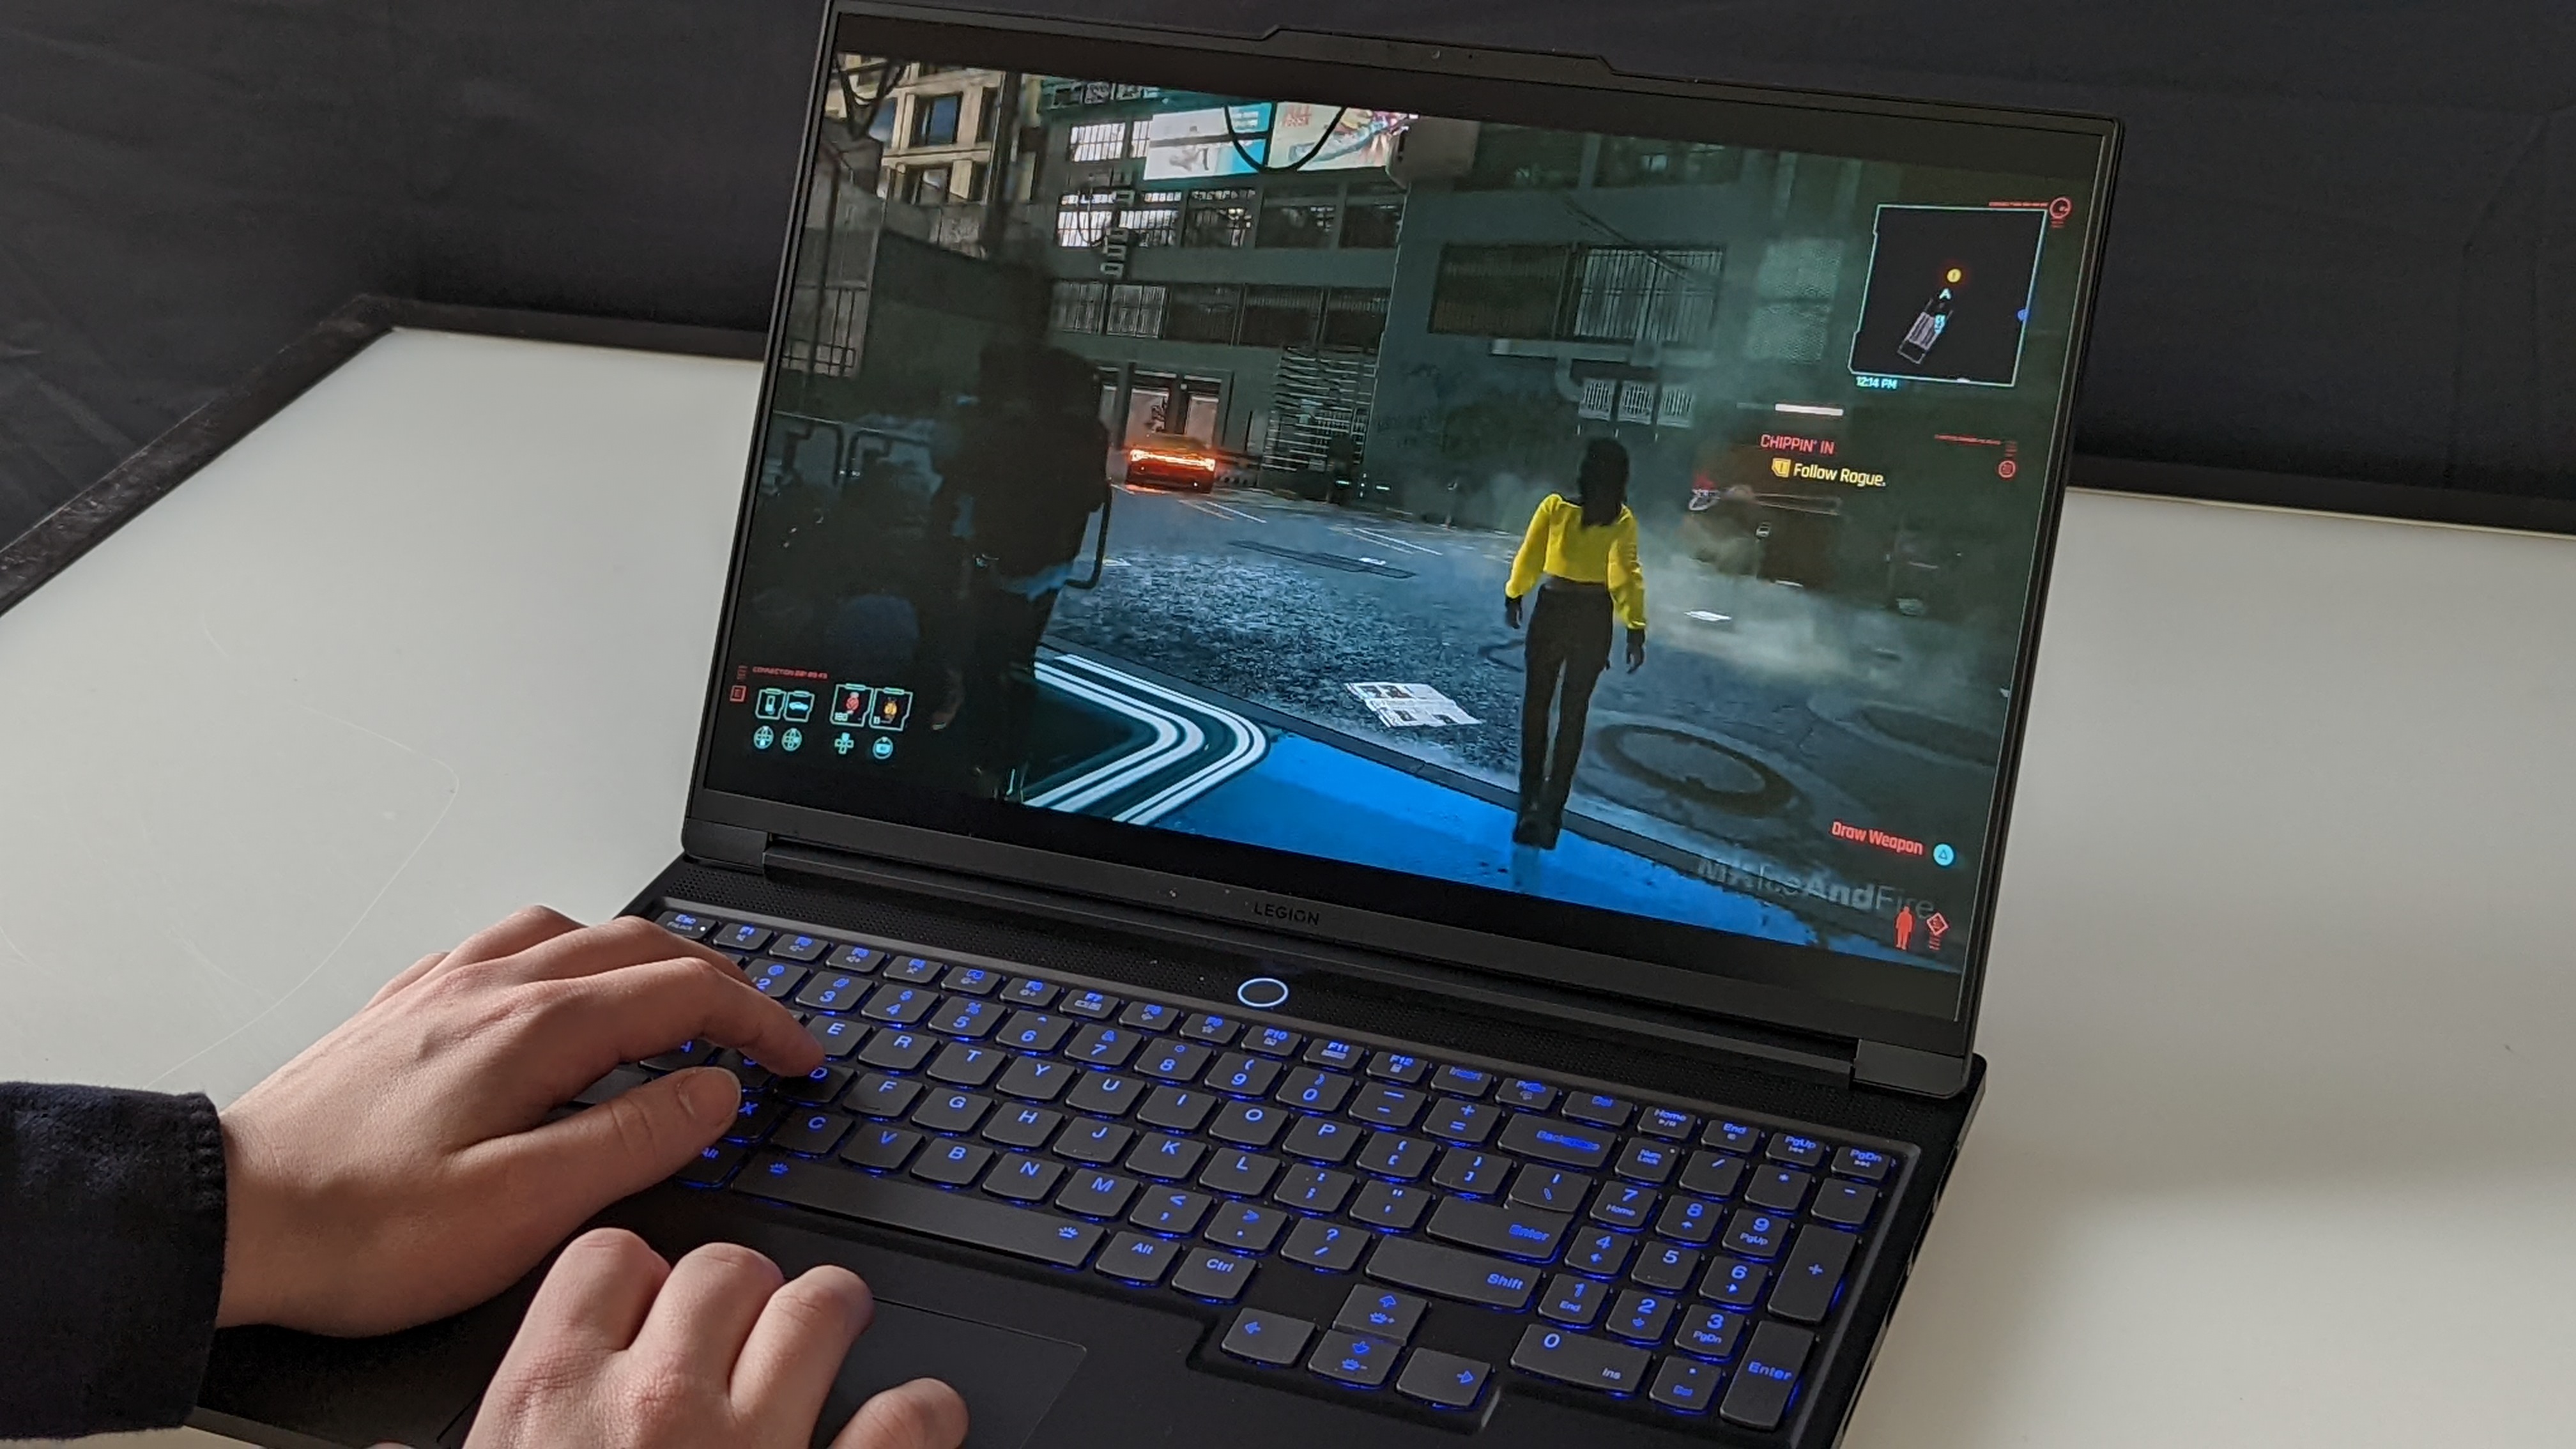 Windows 11 will hobble gaming performance by default on some